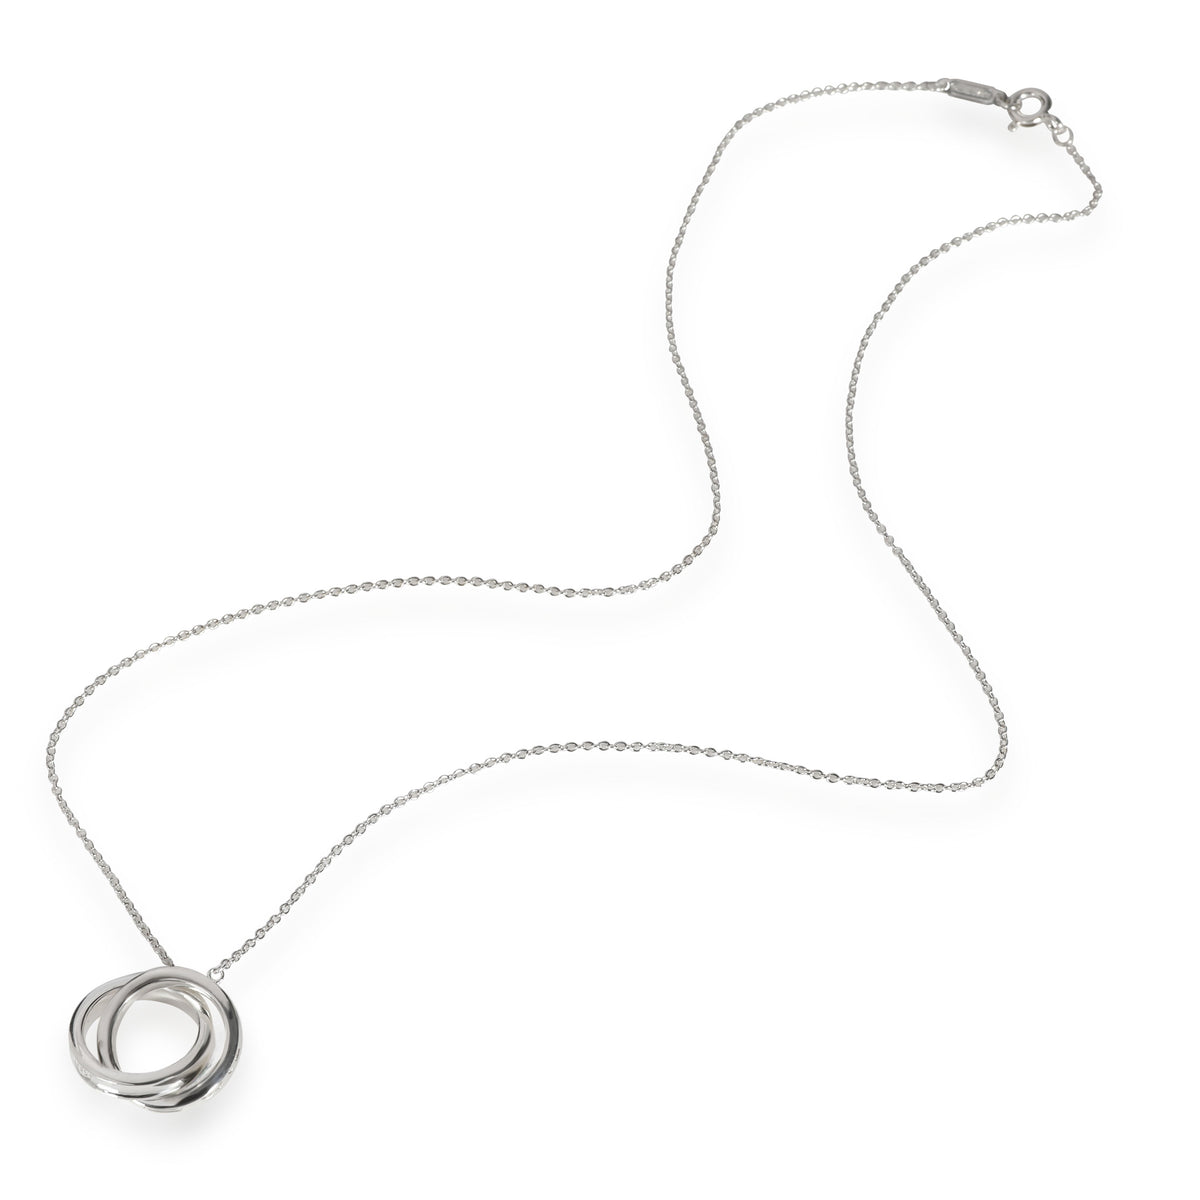 Tiffany & Co. 1837 Interlocking Circle Necklace in  Sterling Silver